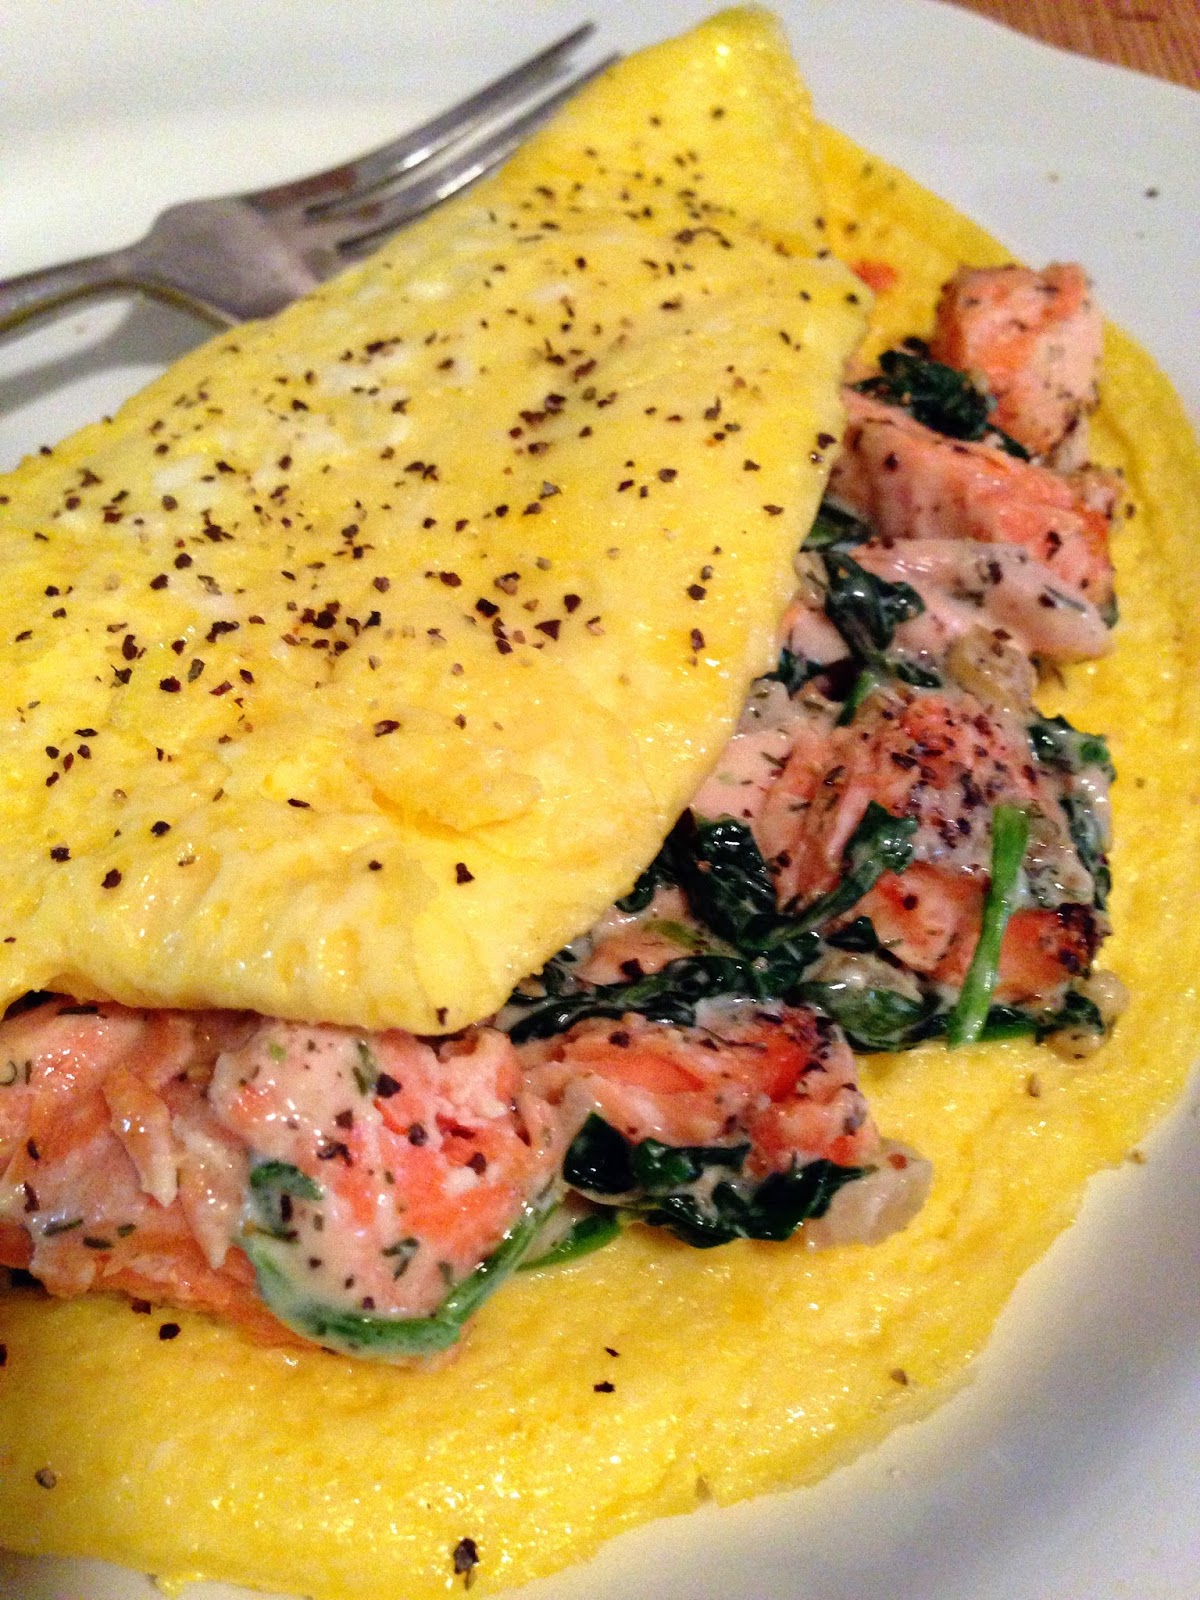 How to make omelet creamy